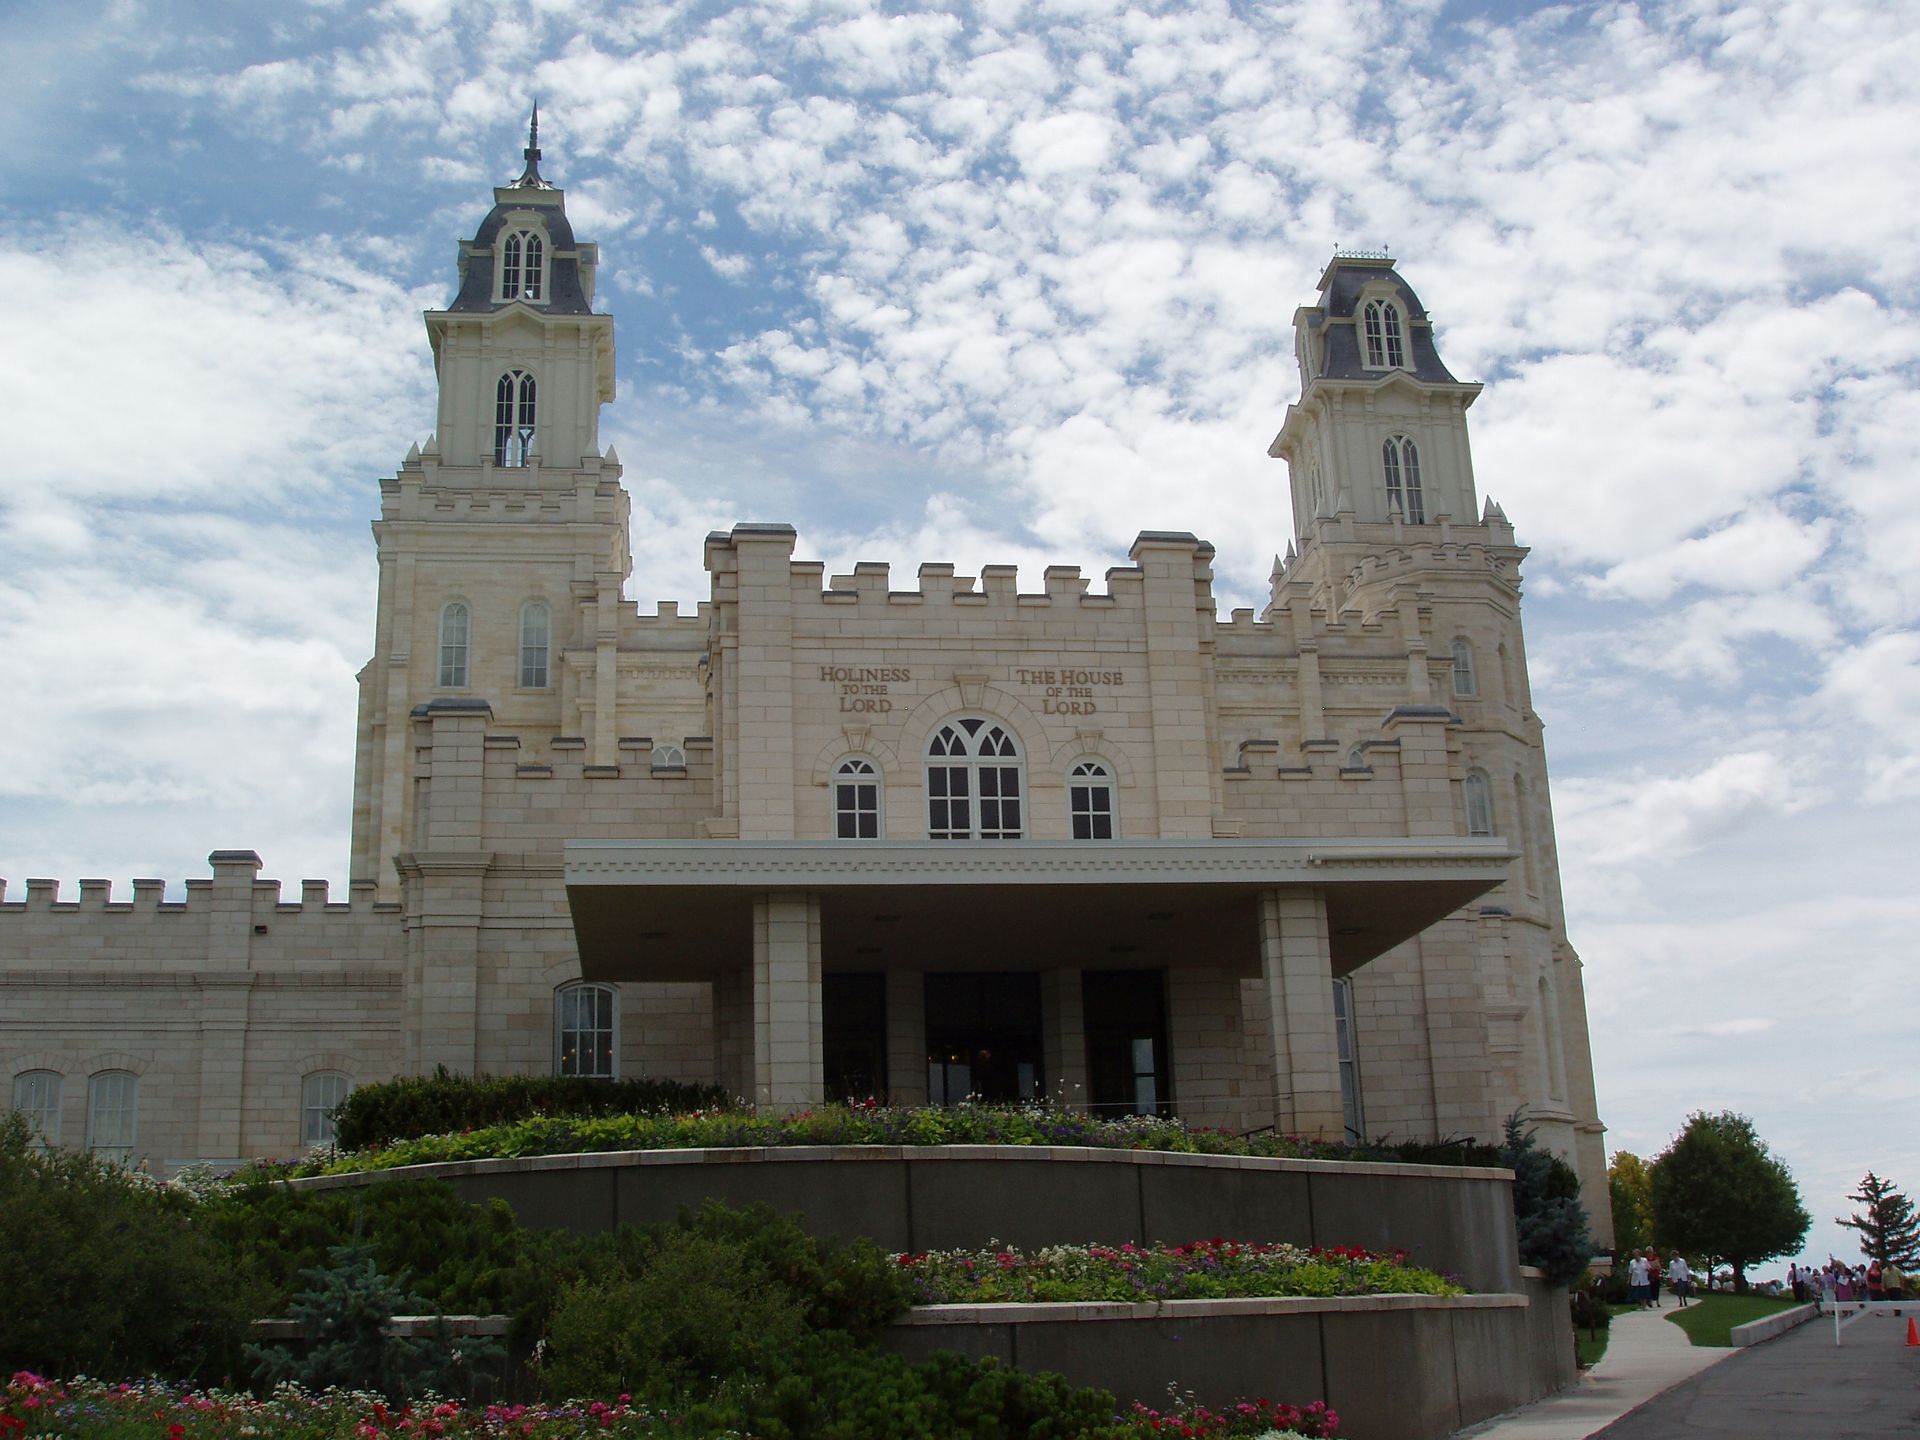 The Manti Utah Temple entrance, including scenery.